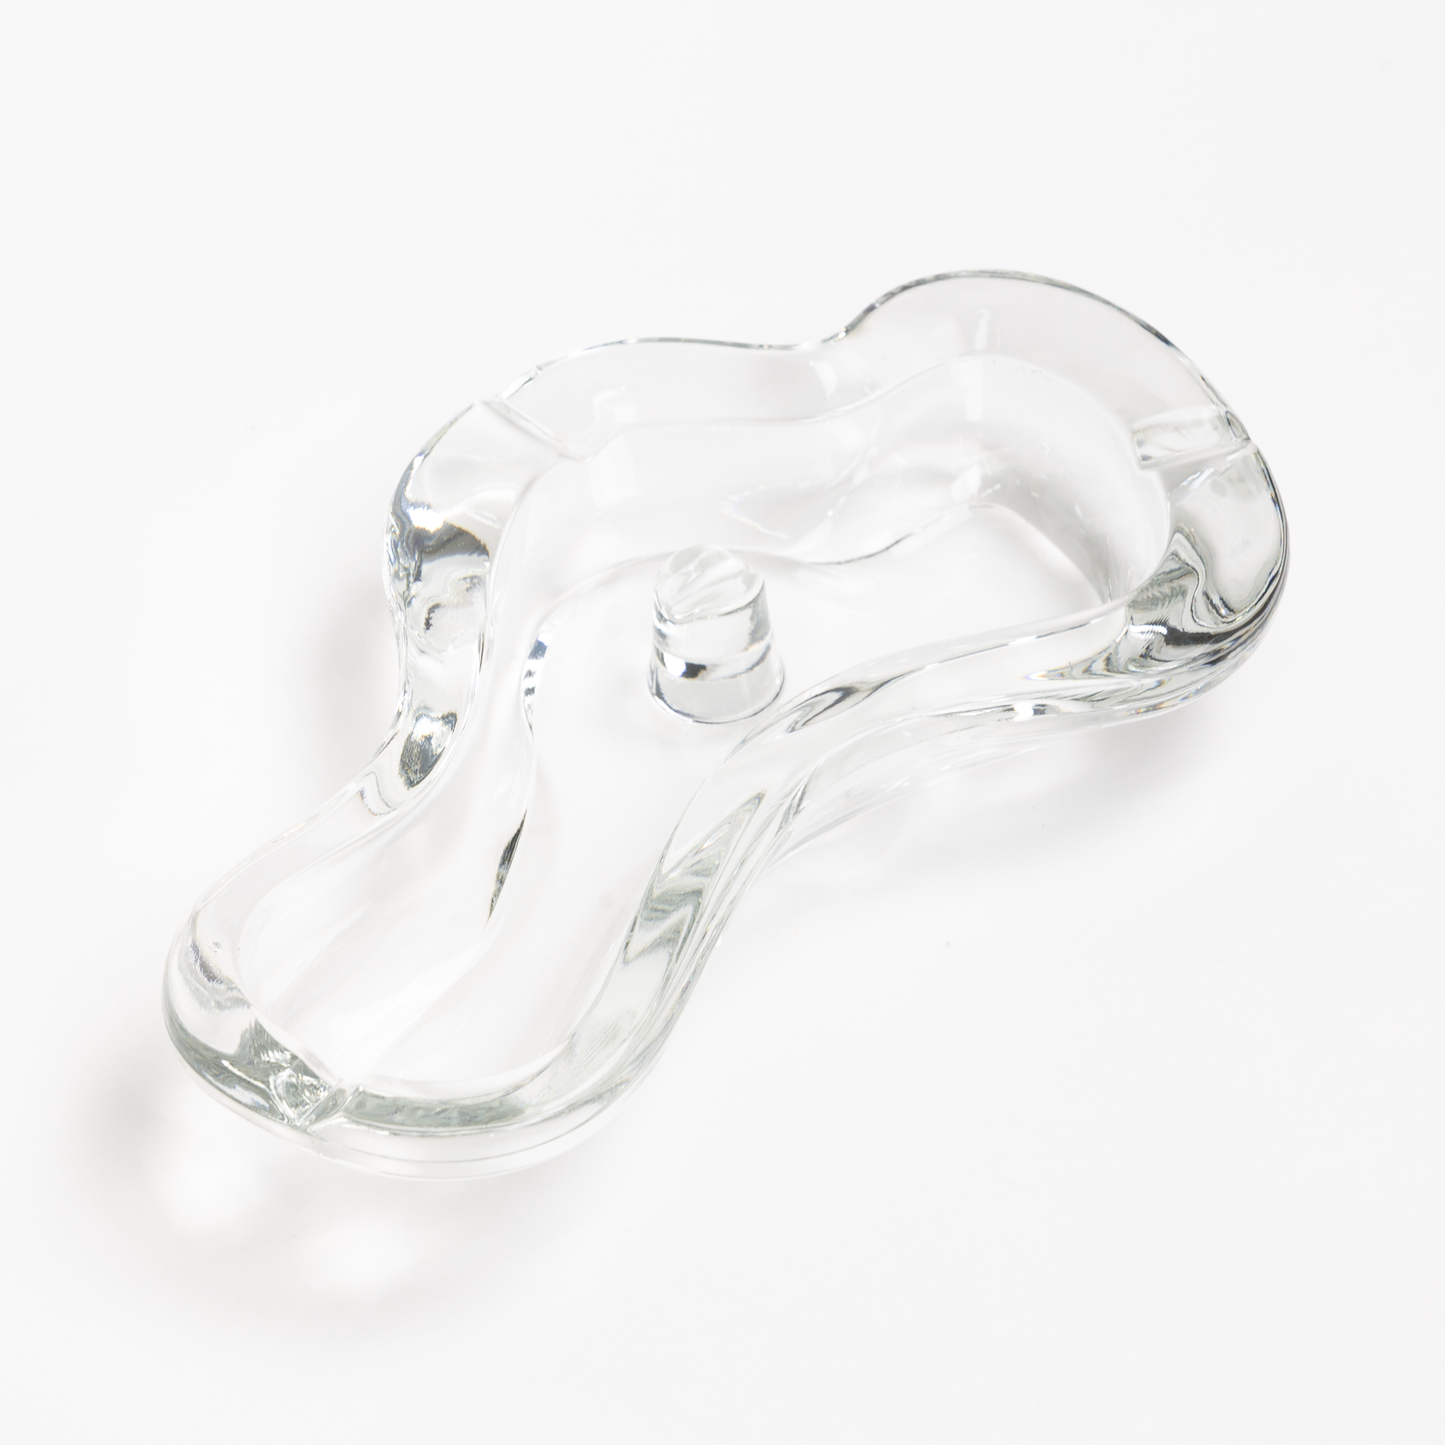 Clear Glass Ashtray